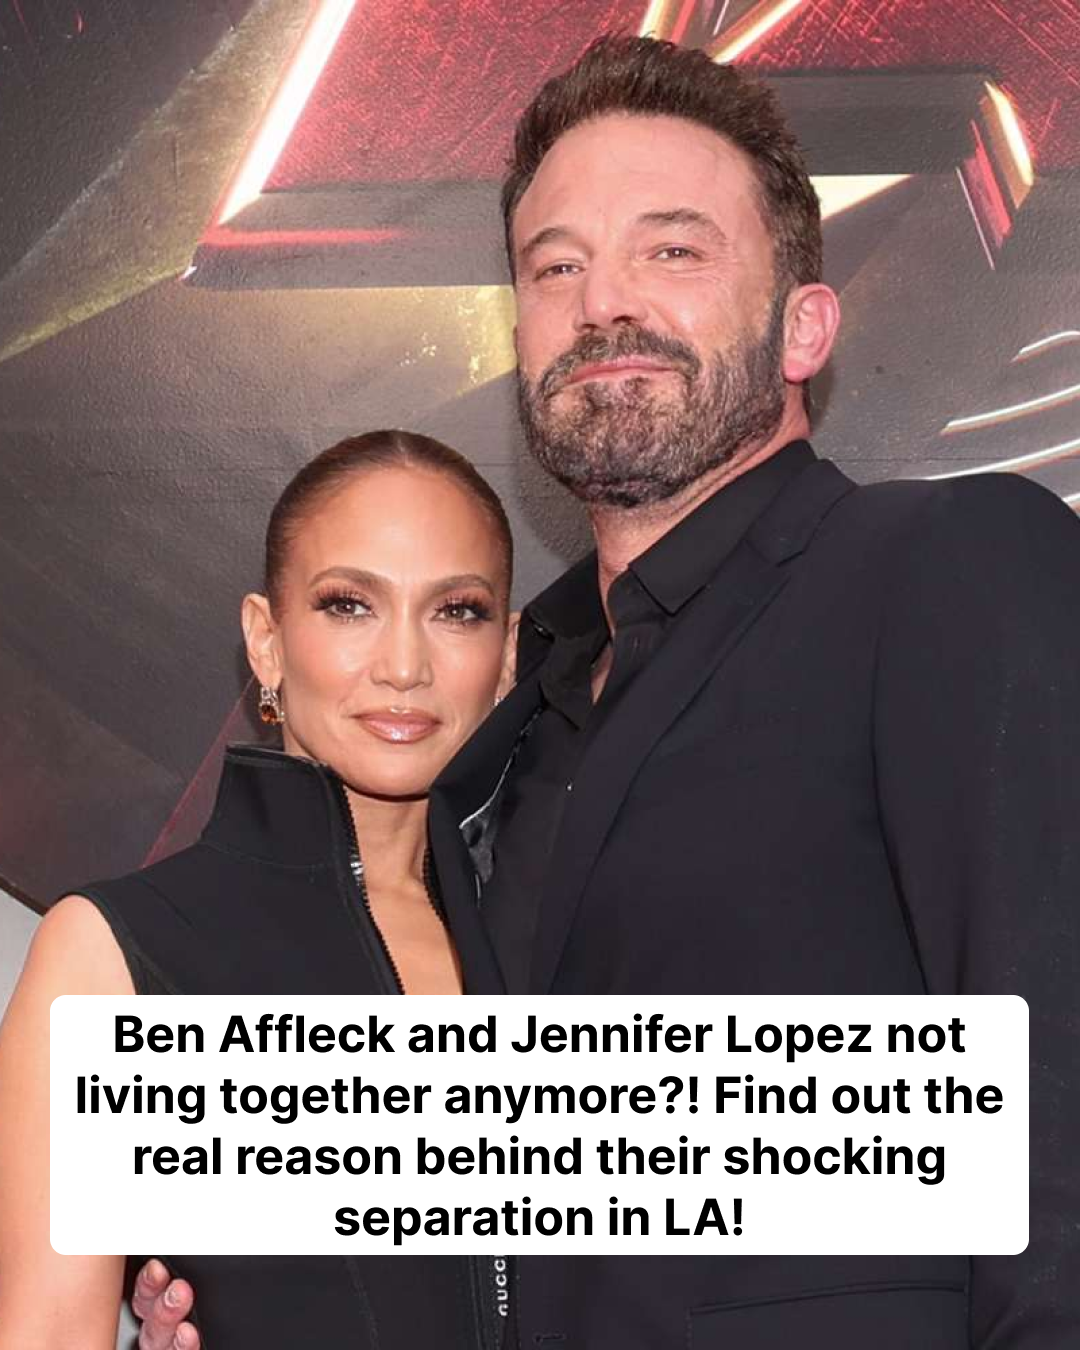 Ben Affleck and Jennifer Lopez Are Living Separately amid Marriage Strife: Sources